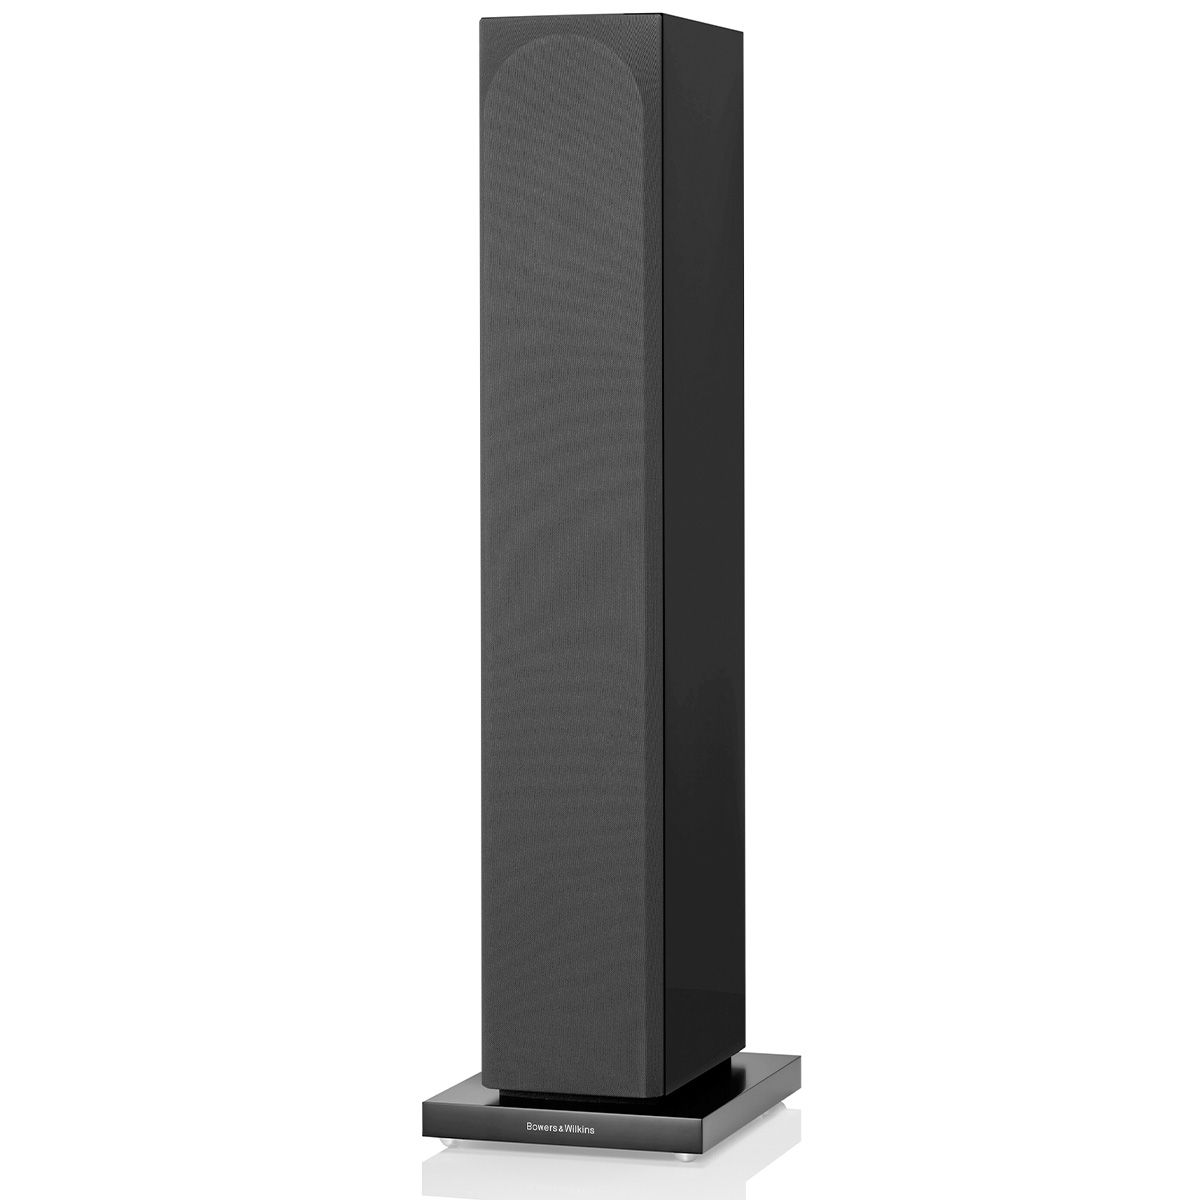 Bowers & Wilkins 704 S3 3-Way Floorstanding Loudspeaker - front angle with grille